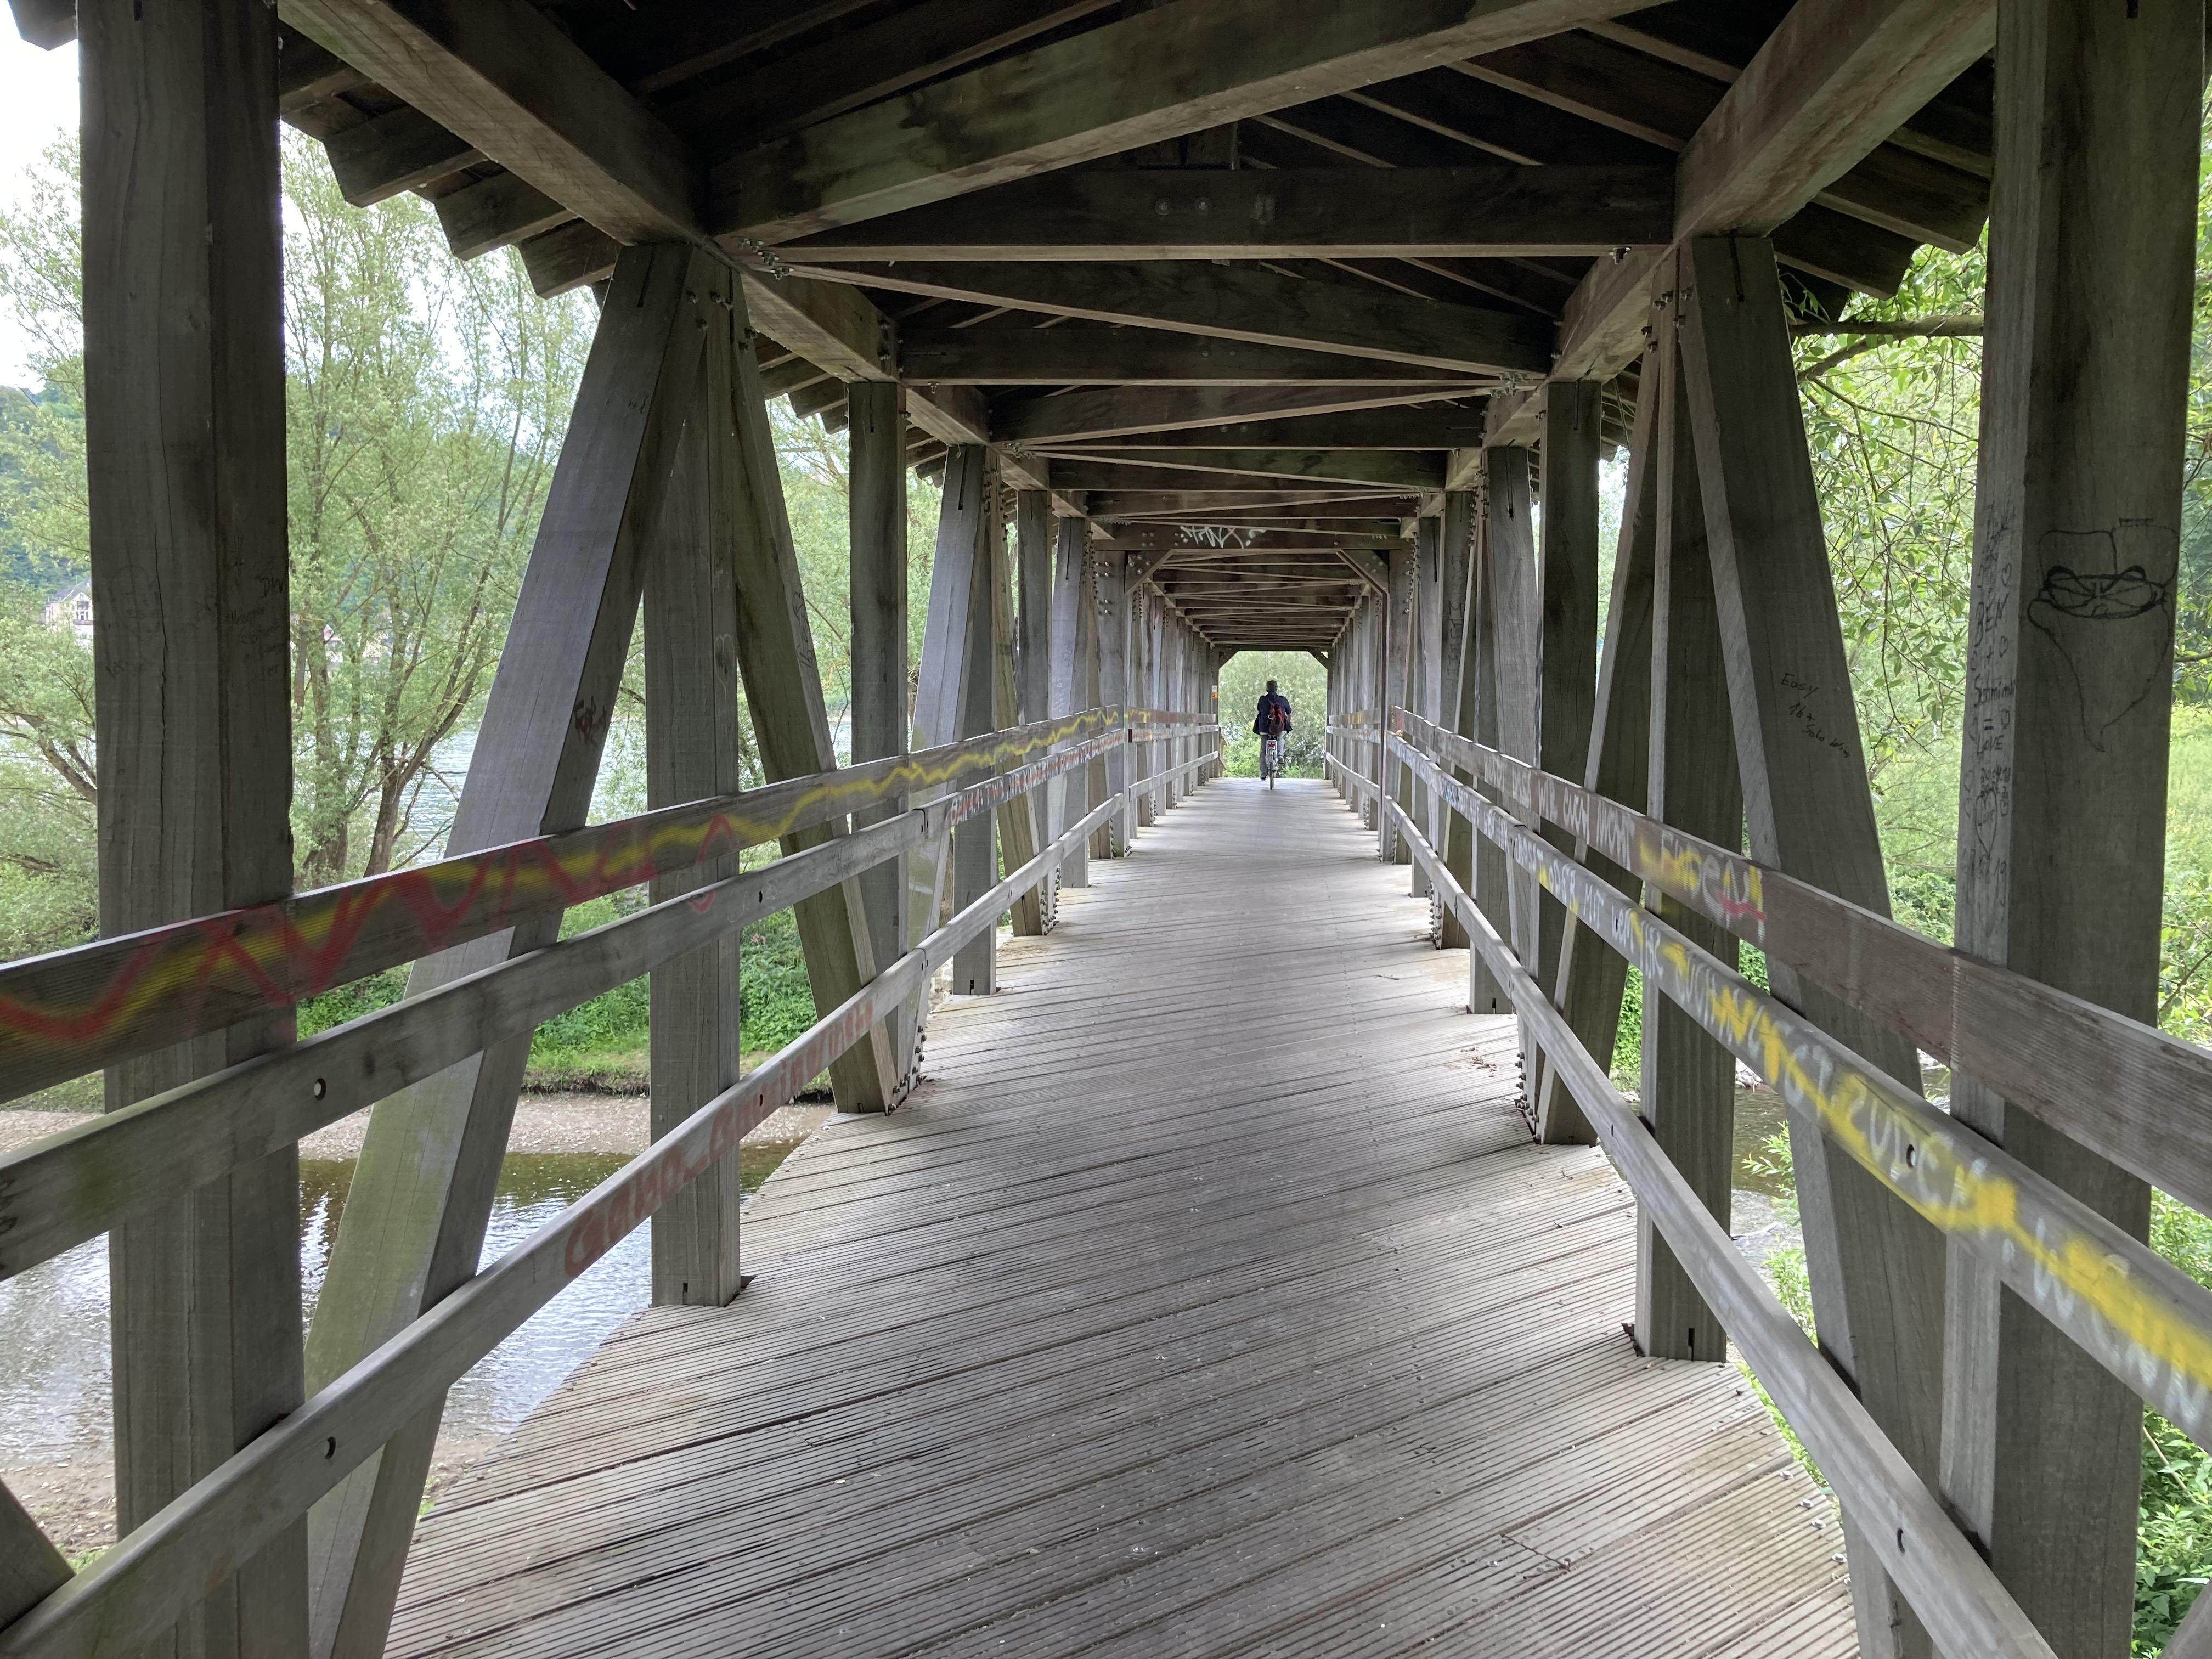 View looking down a covered wooden bridge